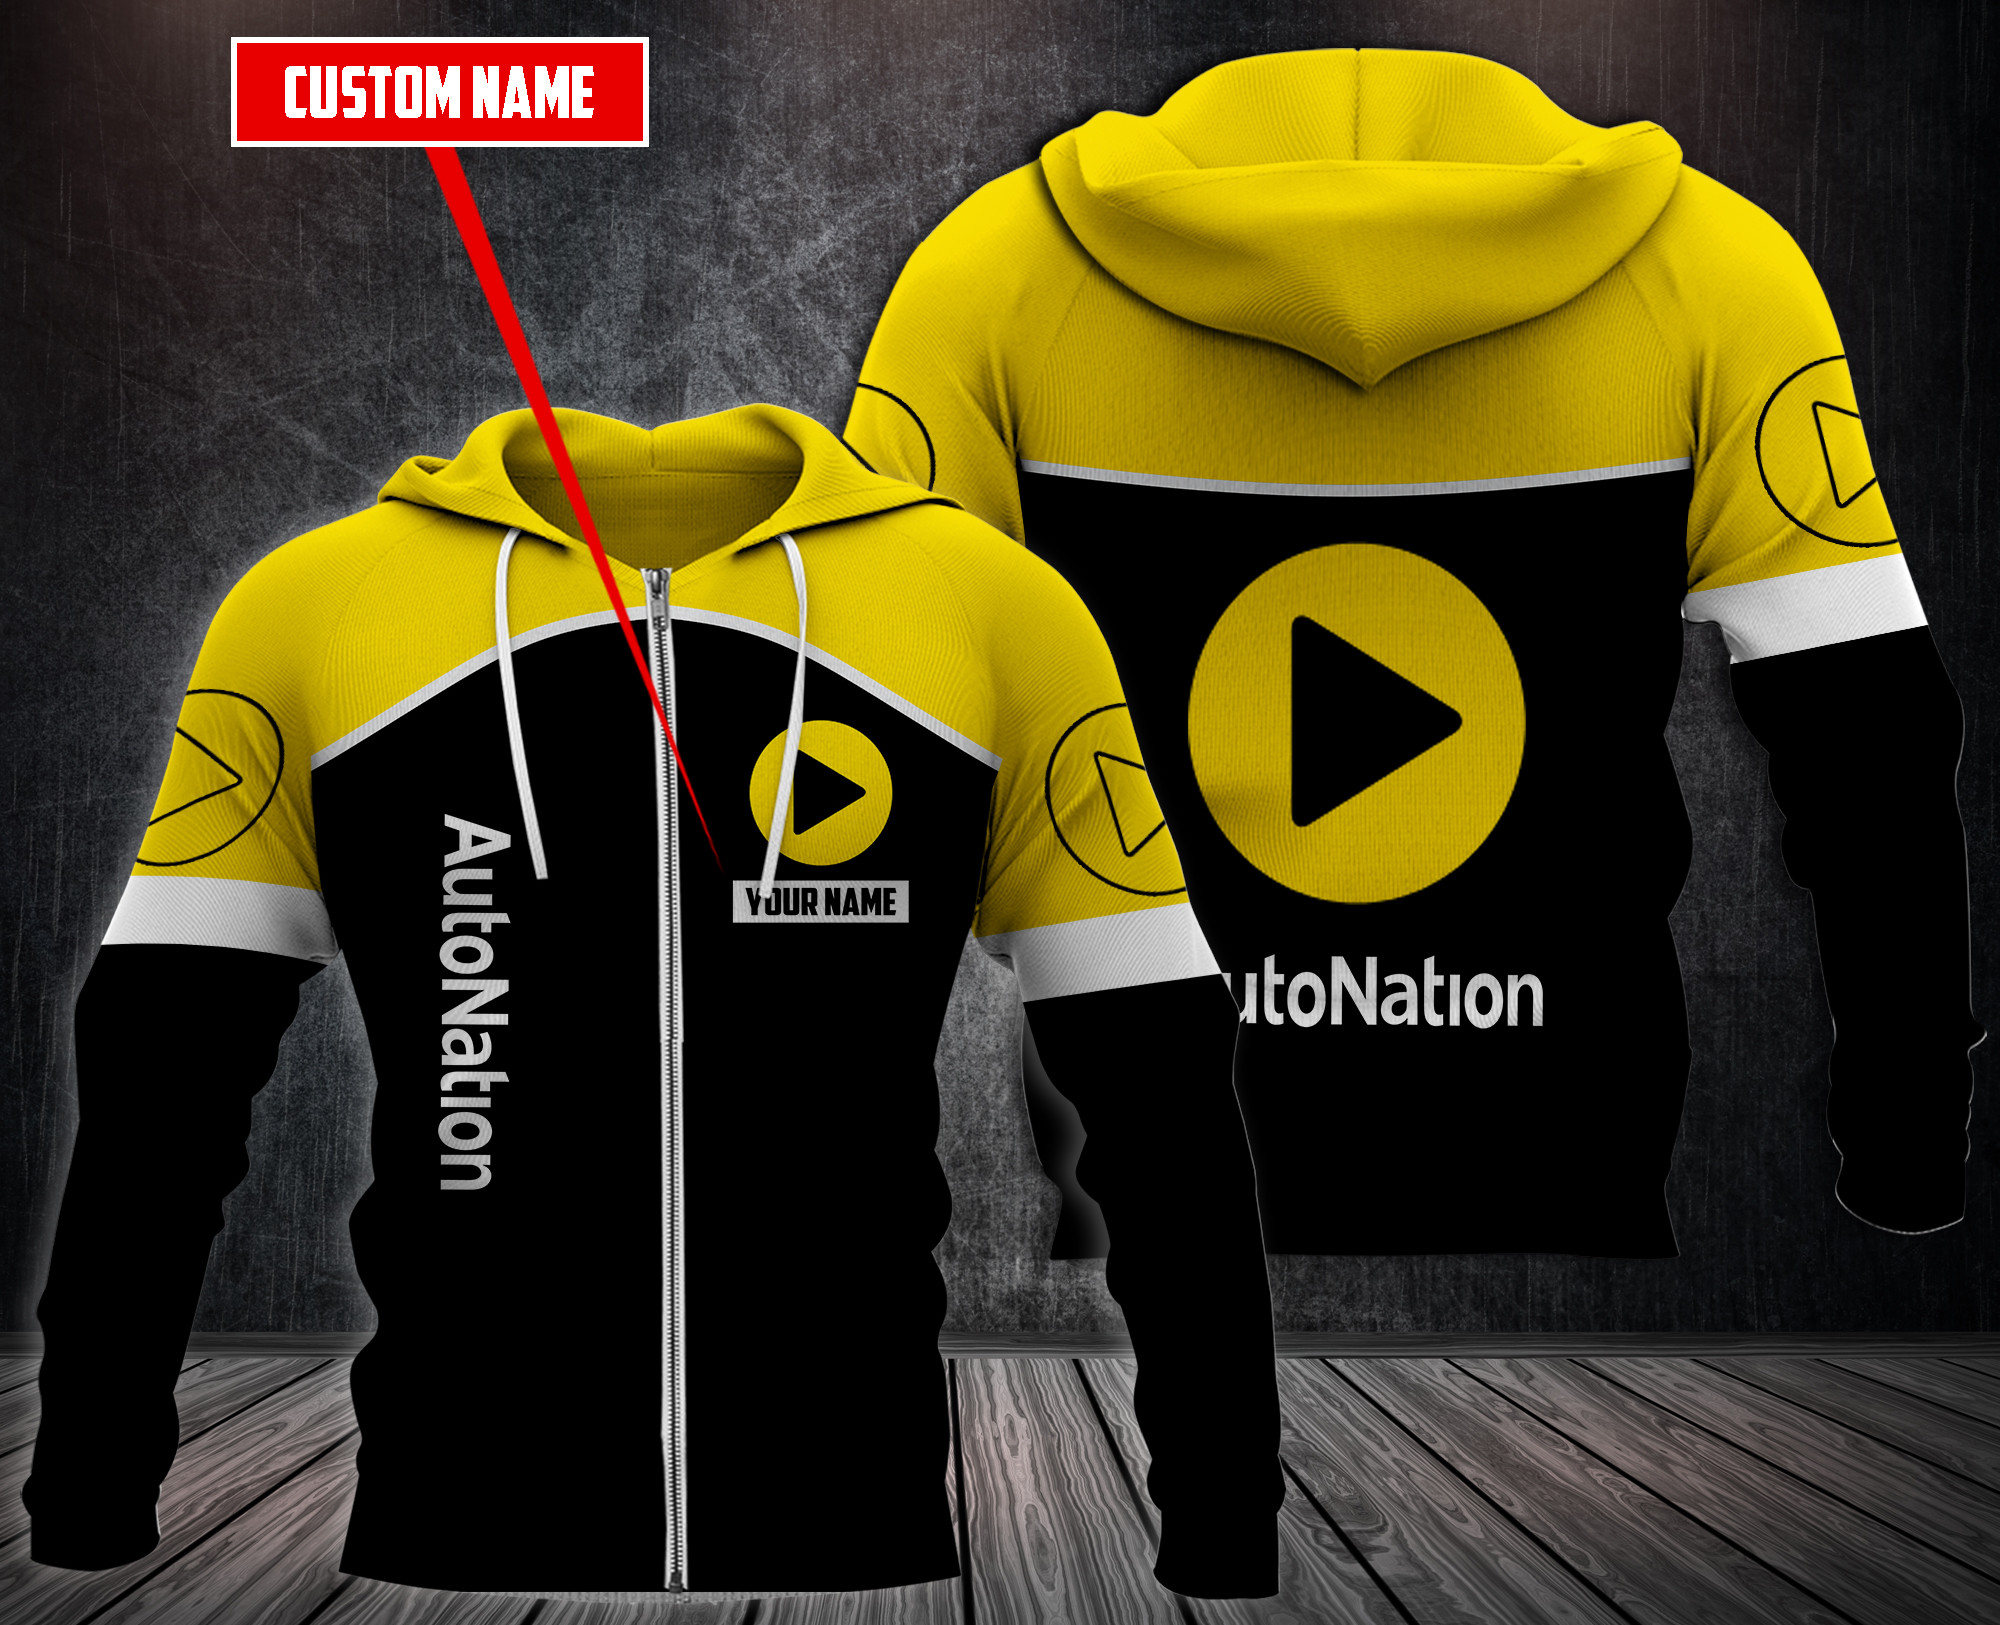 Choose the right hoodies for you on our boxboxshirt and ethershirt websites in 2022 35